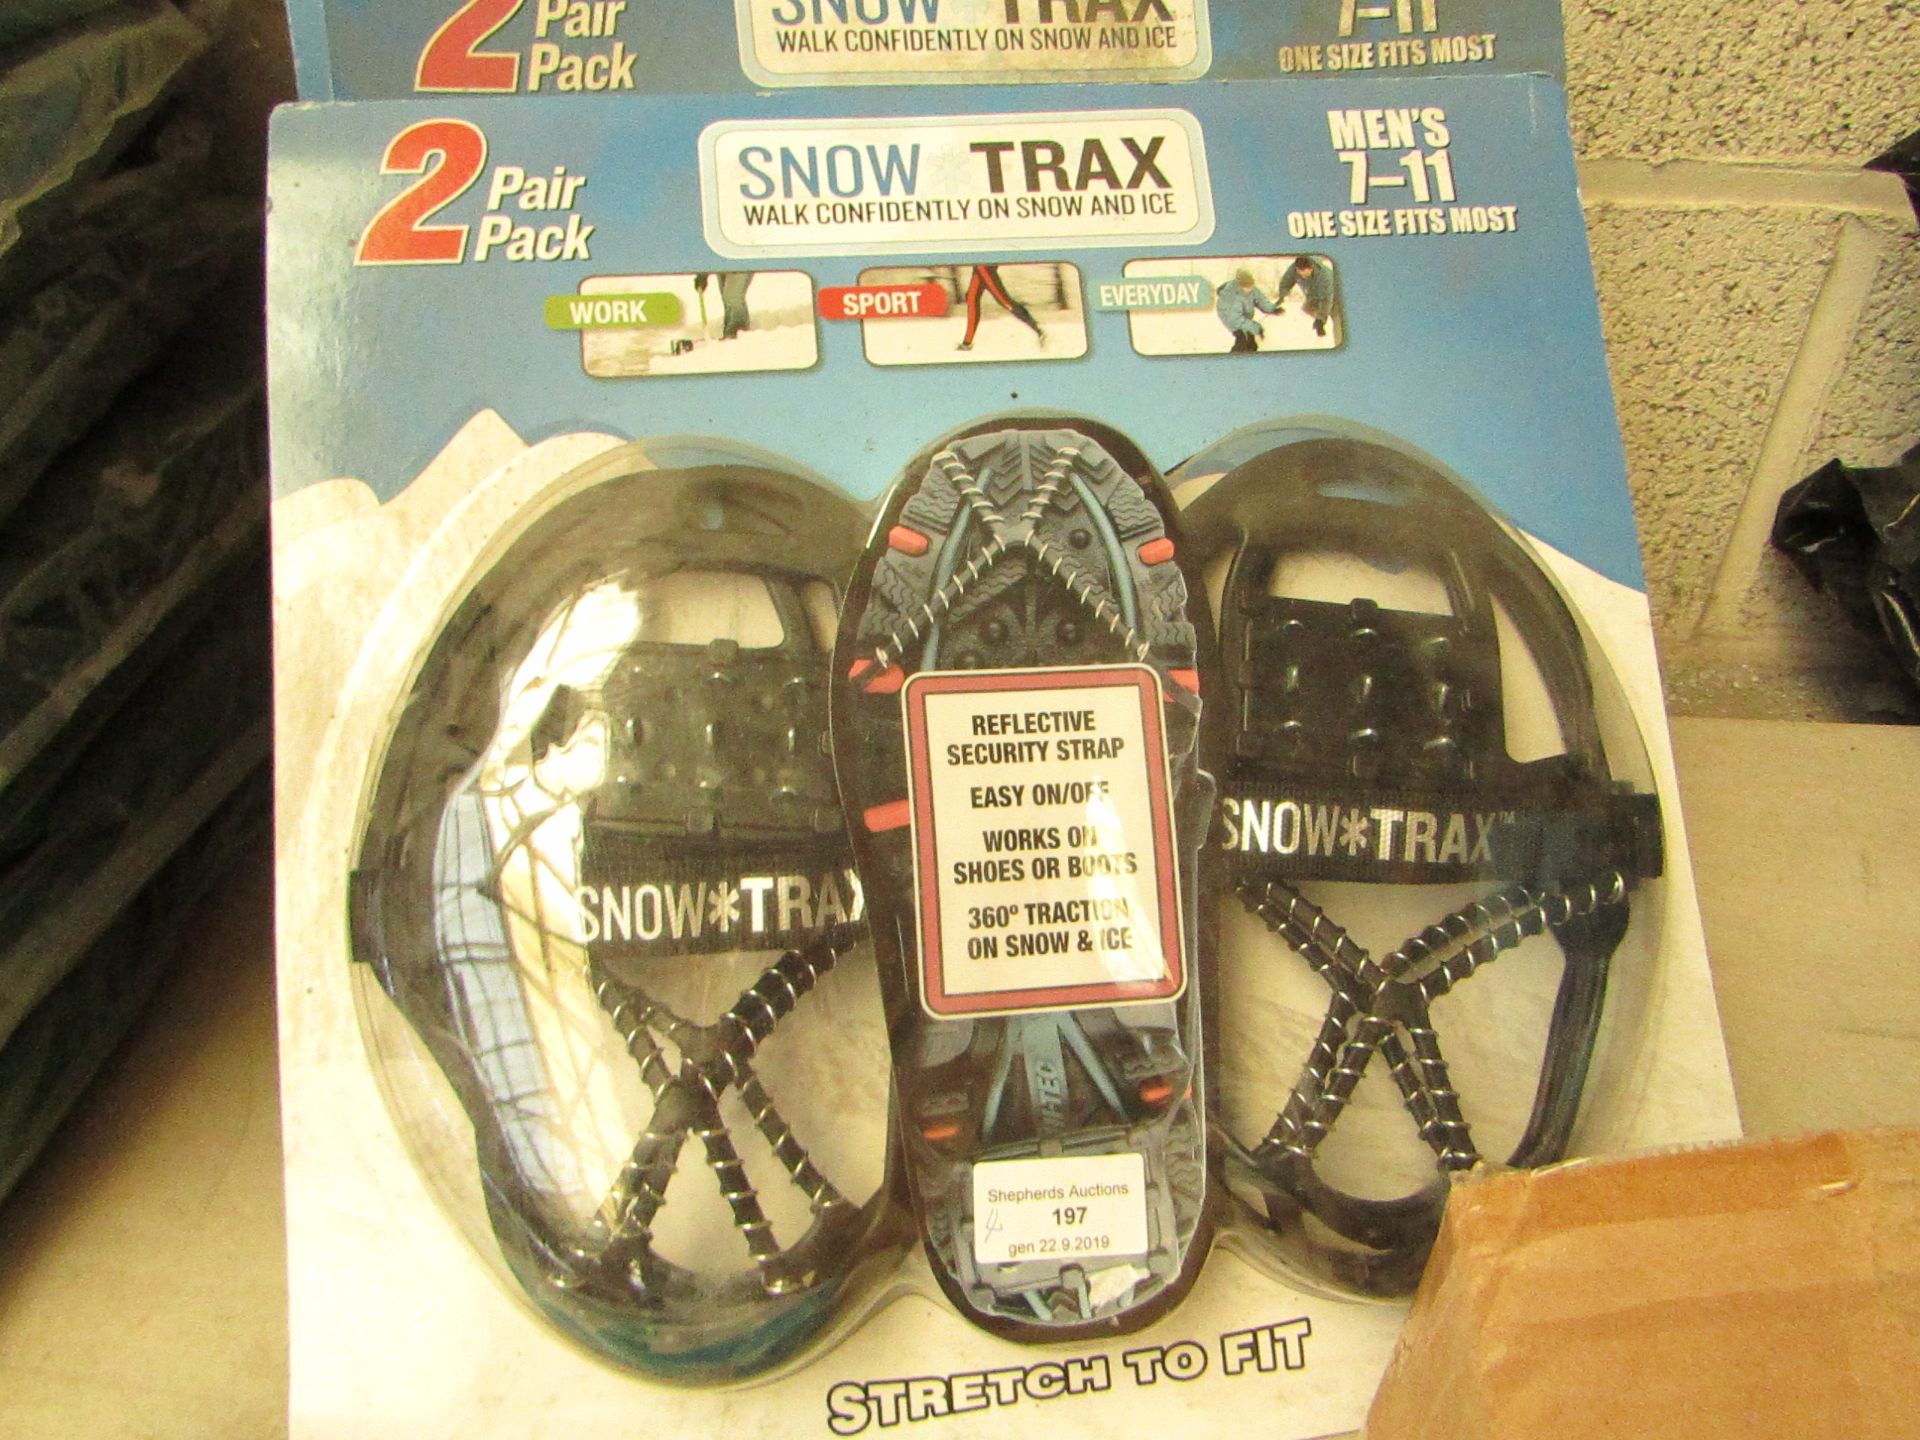 4 sets Of 2 Snow Trax,Size 7 - 11.New & packaged